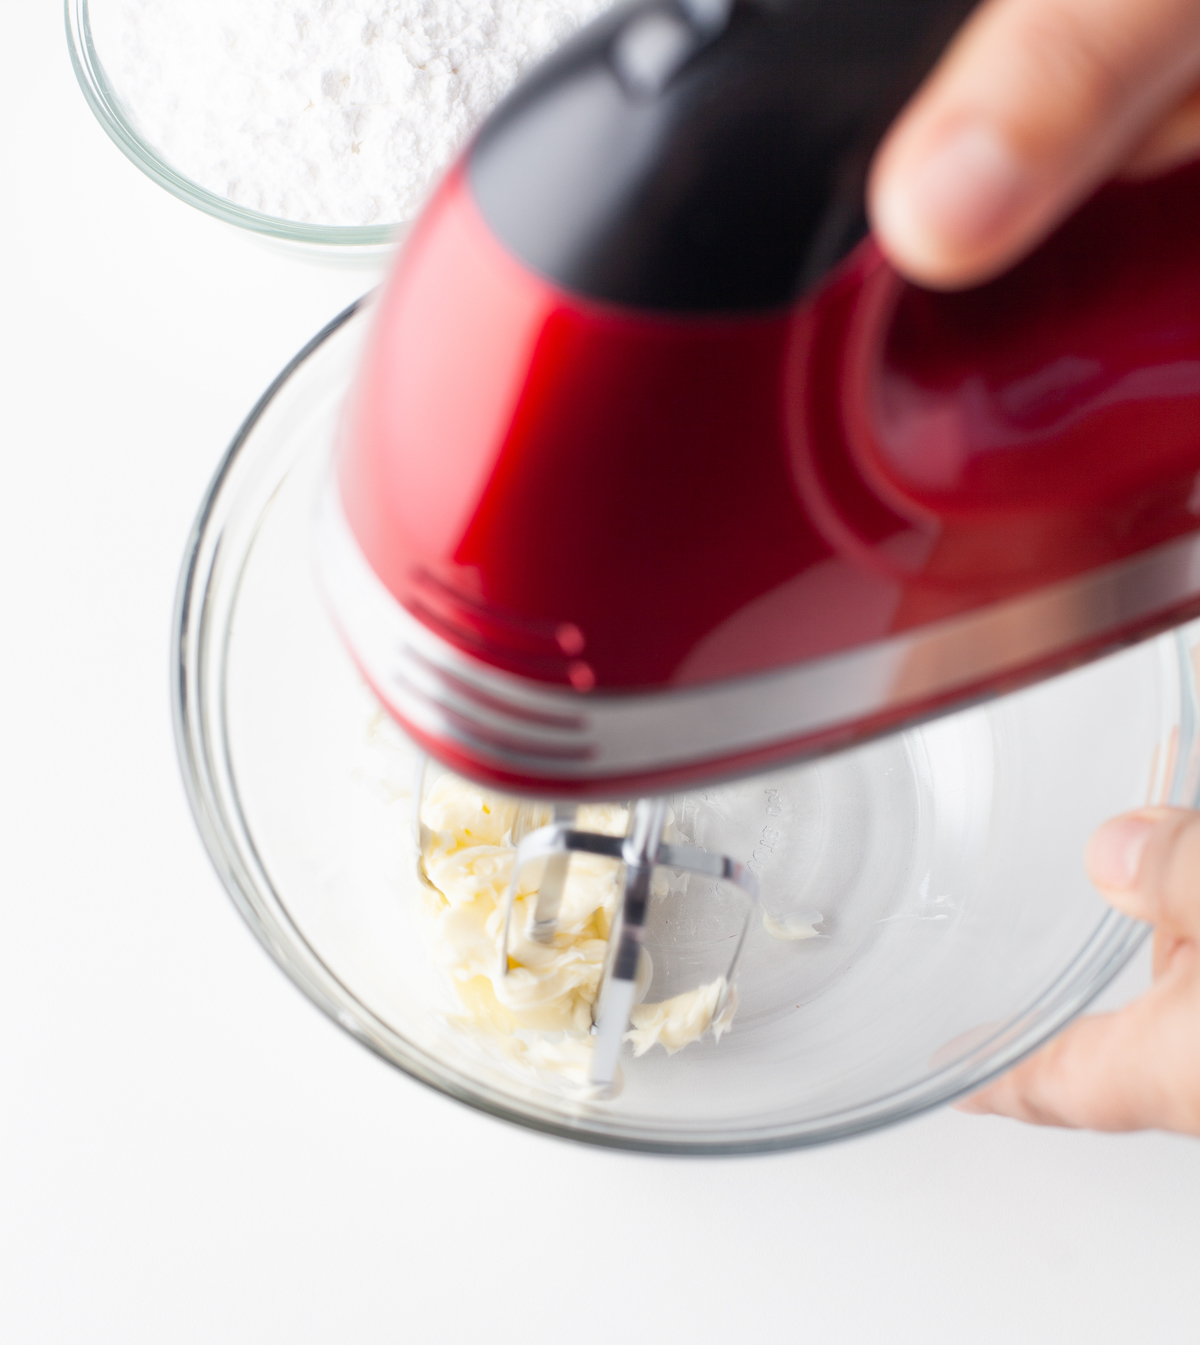 Beating butter with a red mixer in a glass bowl